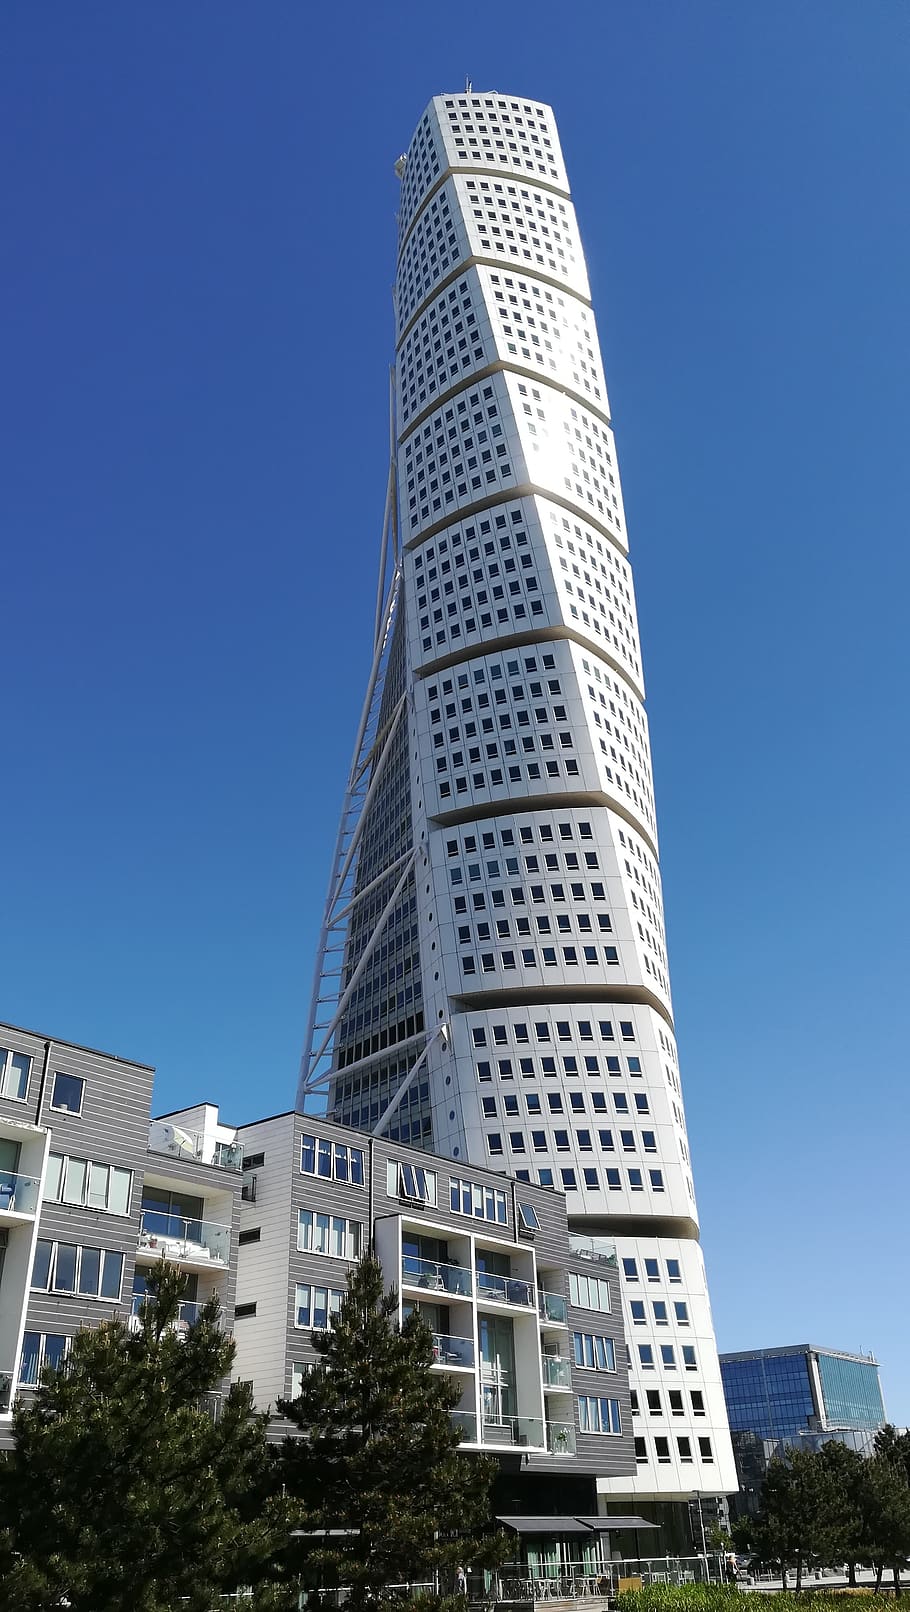 malmoe, turning torso, architecture, building exterior, built structure